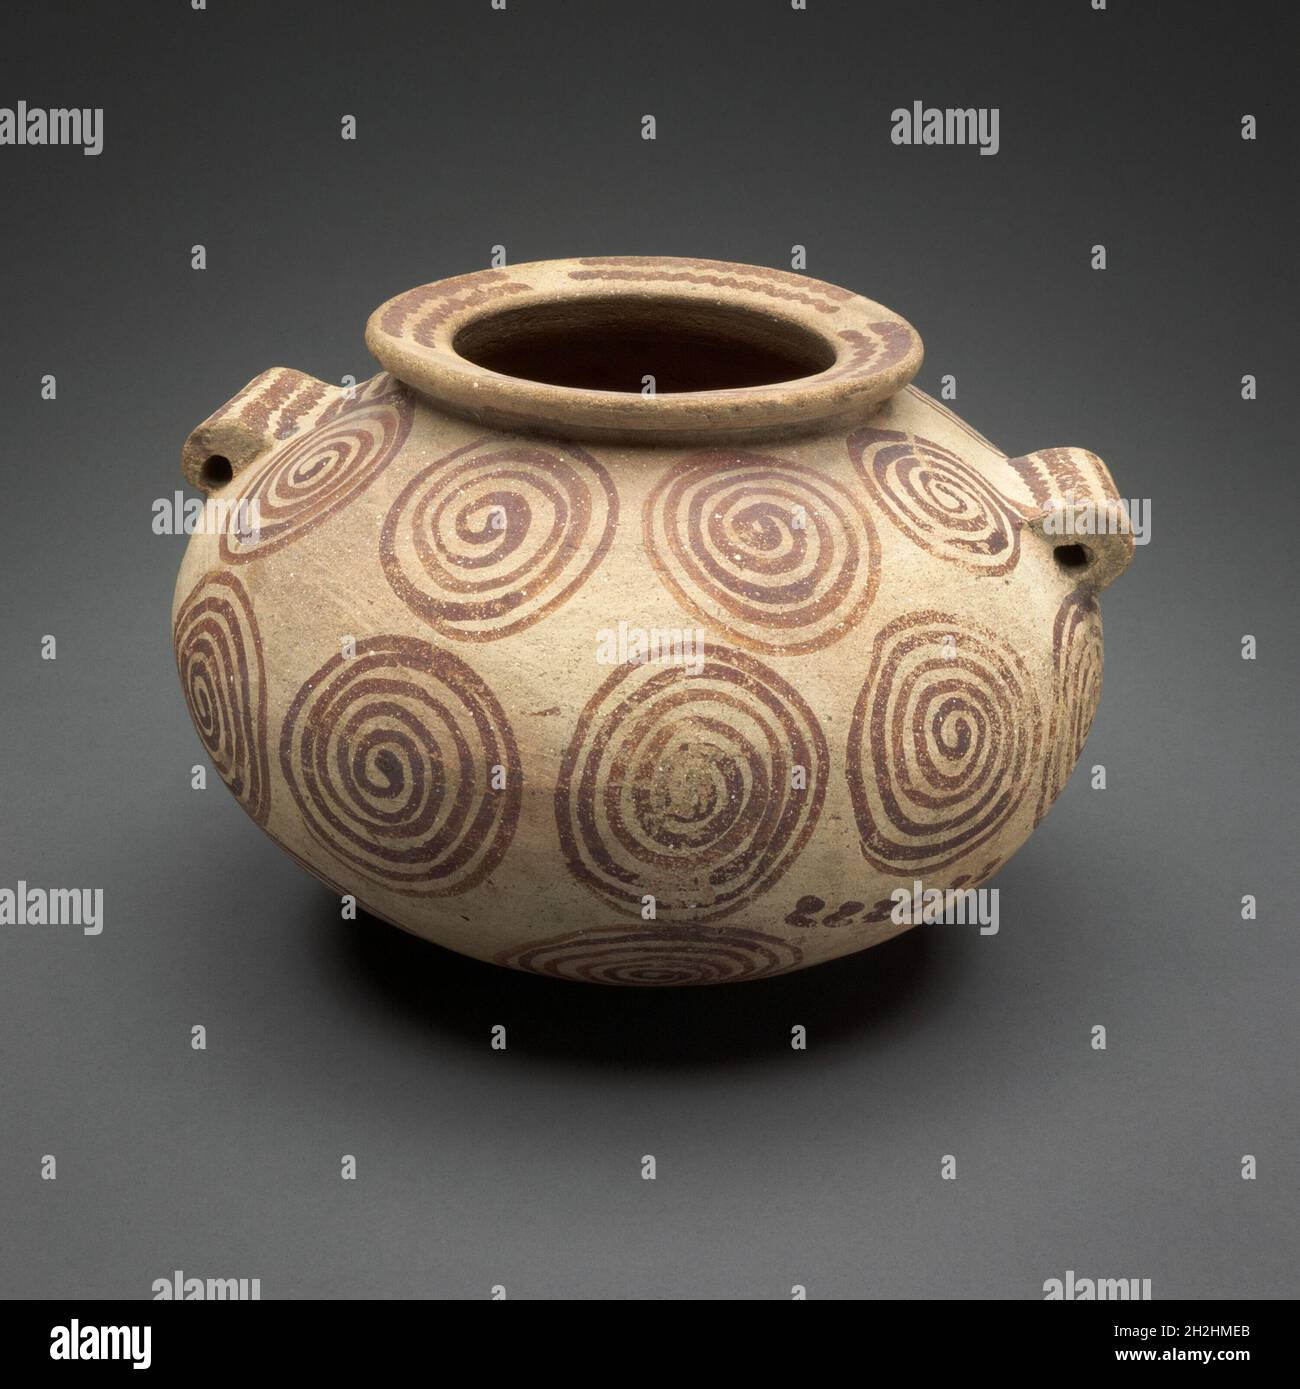 Jar with Painted Decoration, Egypt, Predynastic Period, Naqada II (about 3500-3200 BCE). Stock Photo